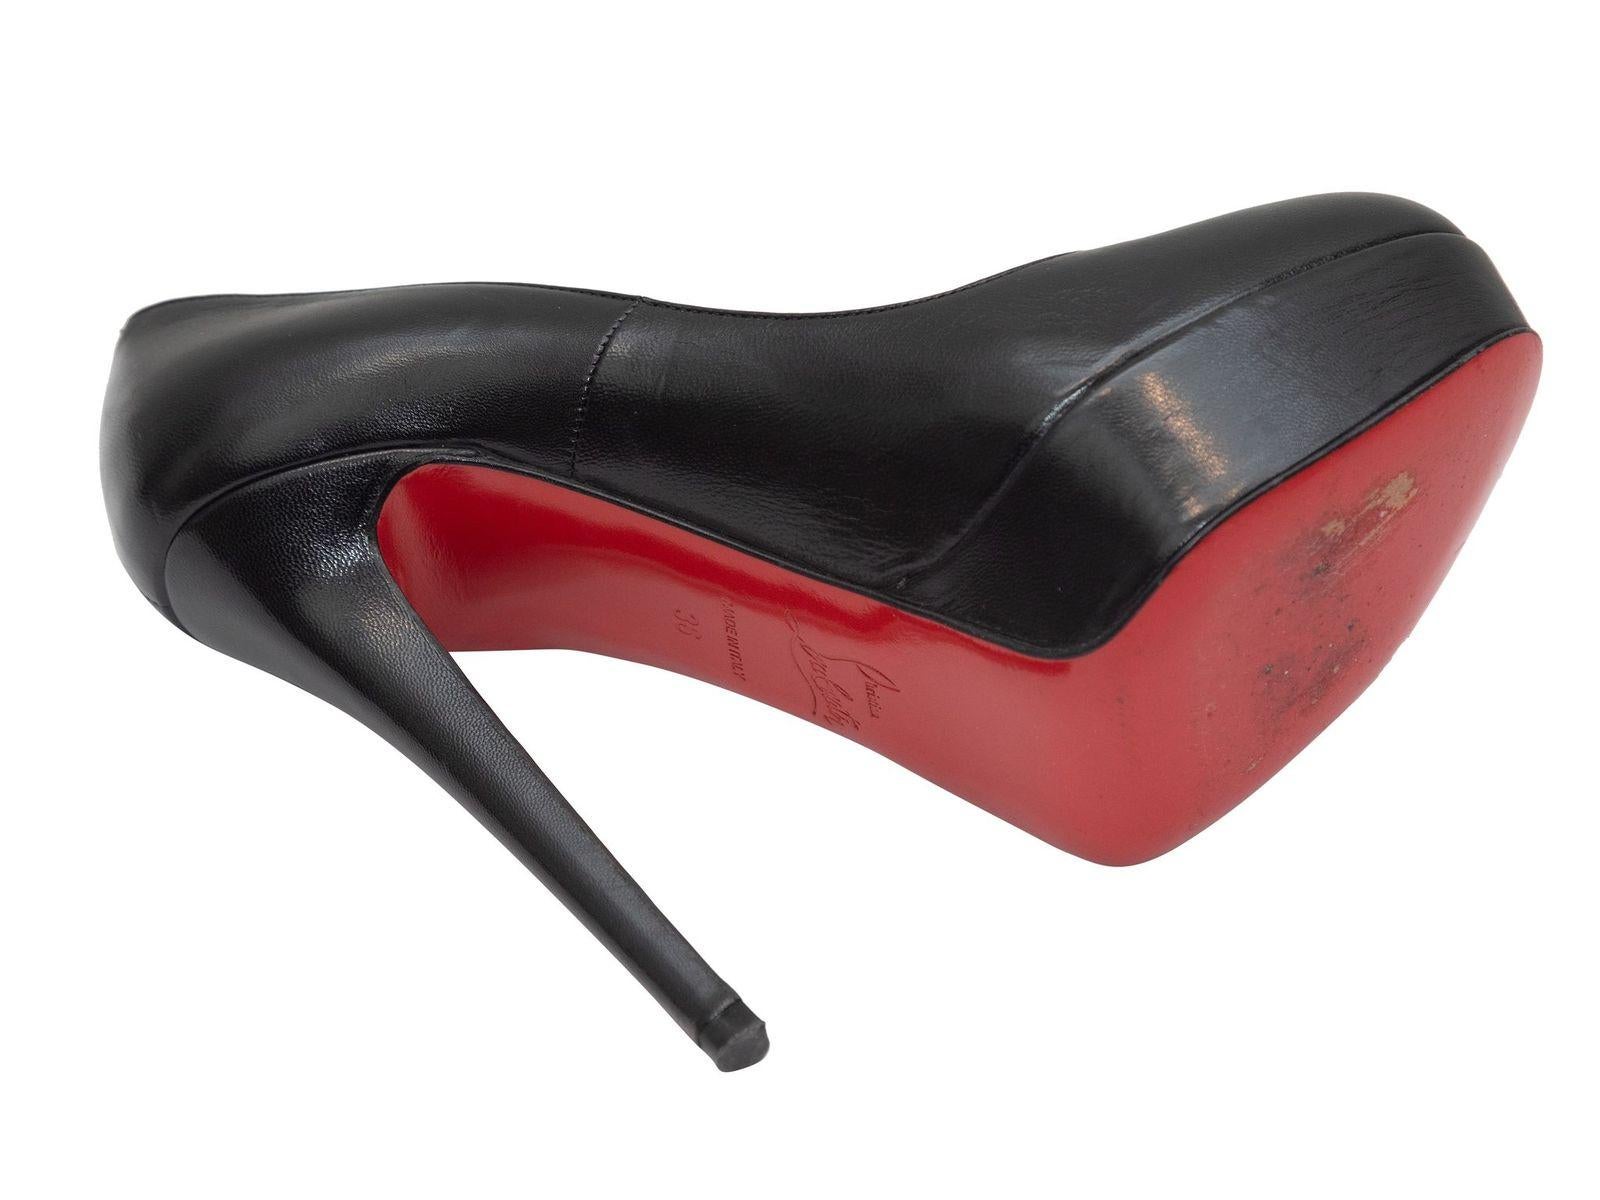 Product Details: Black leather round-toe platform pumps by Christian Louboutin. 1.25